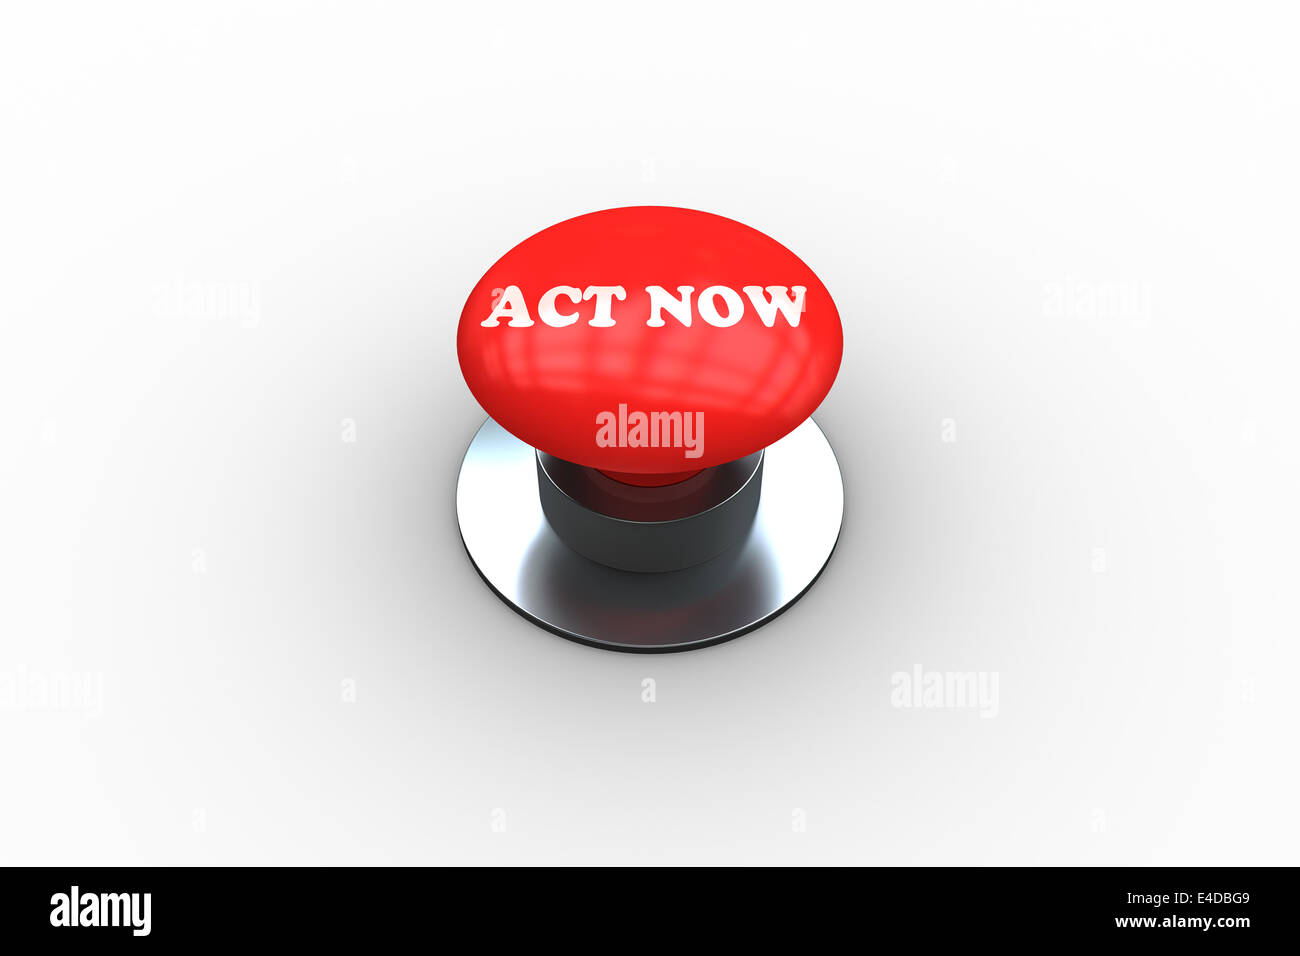 Act now on digitally generated red push button Stock Photo